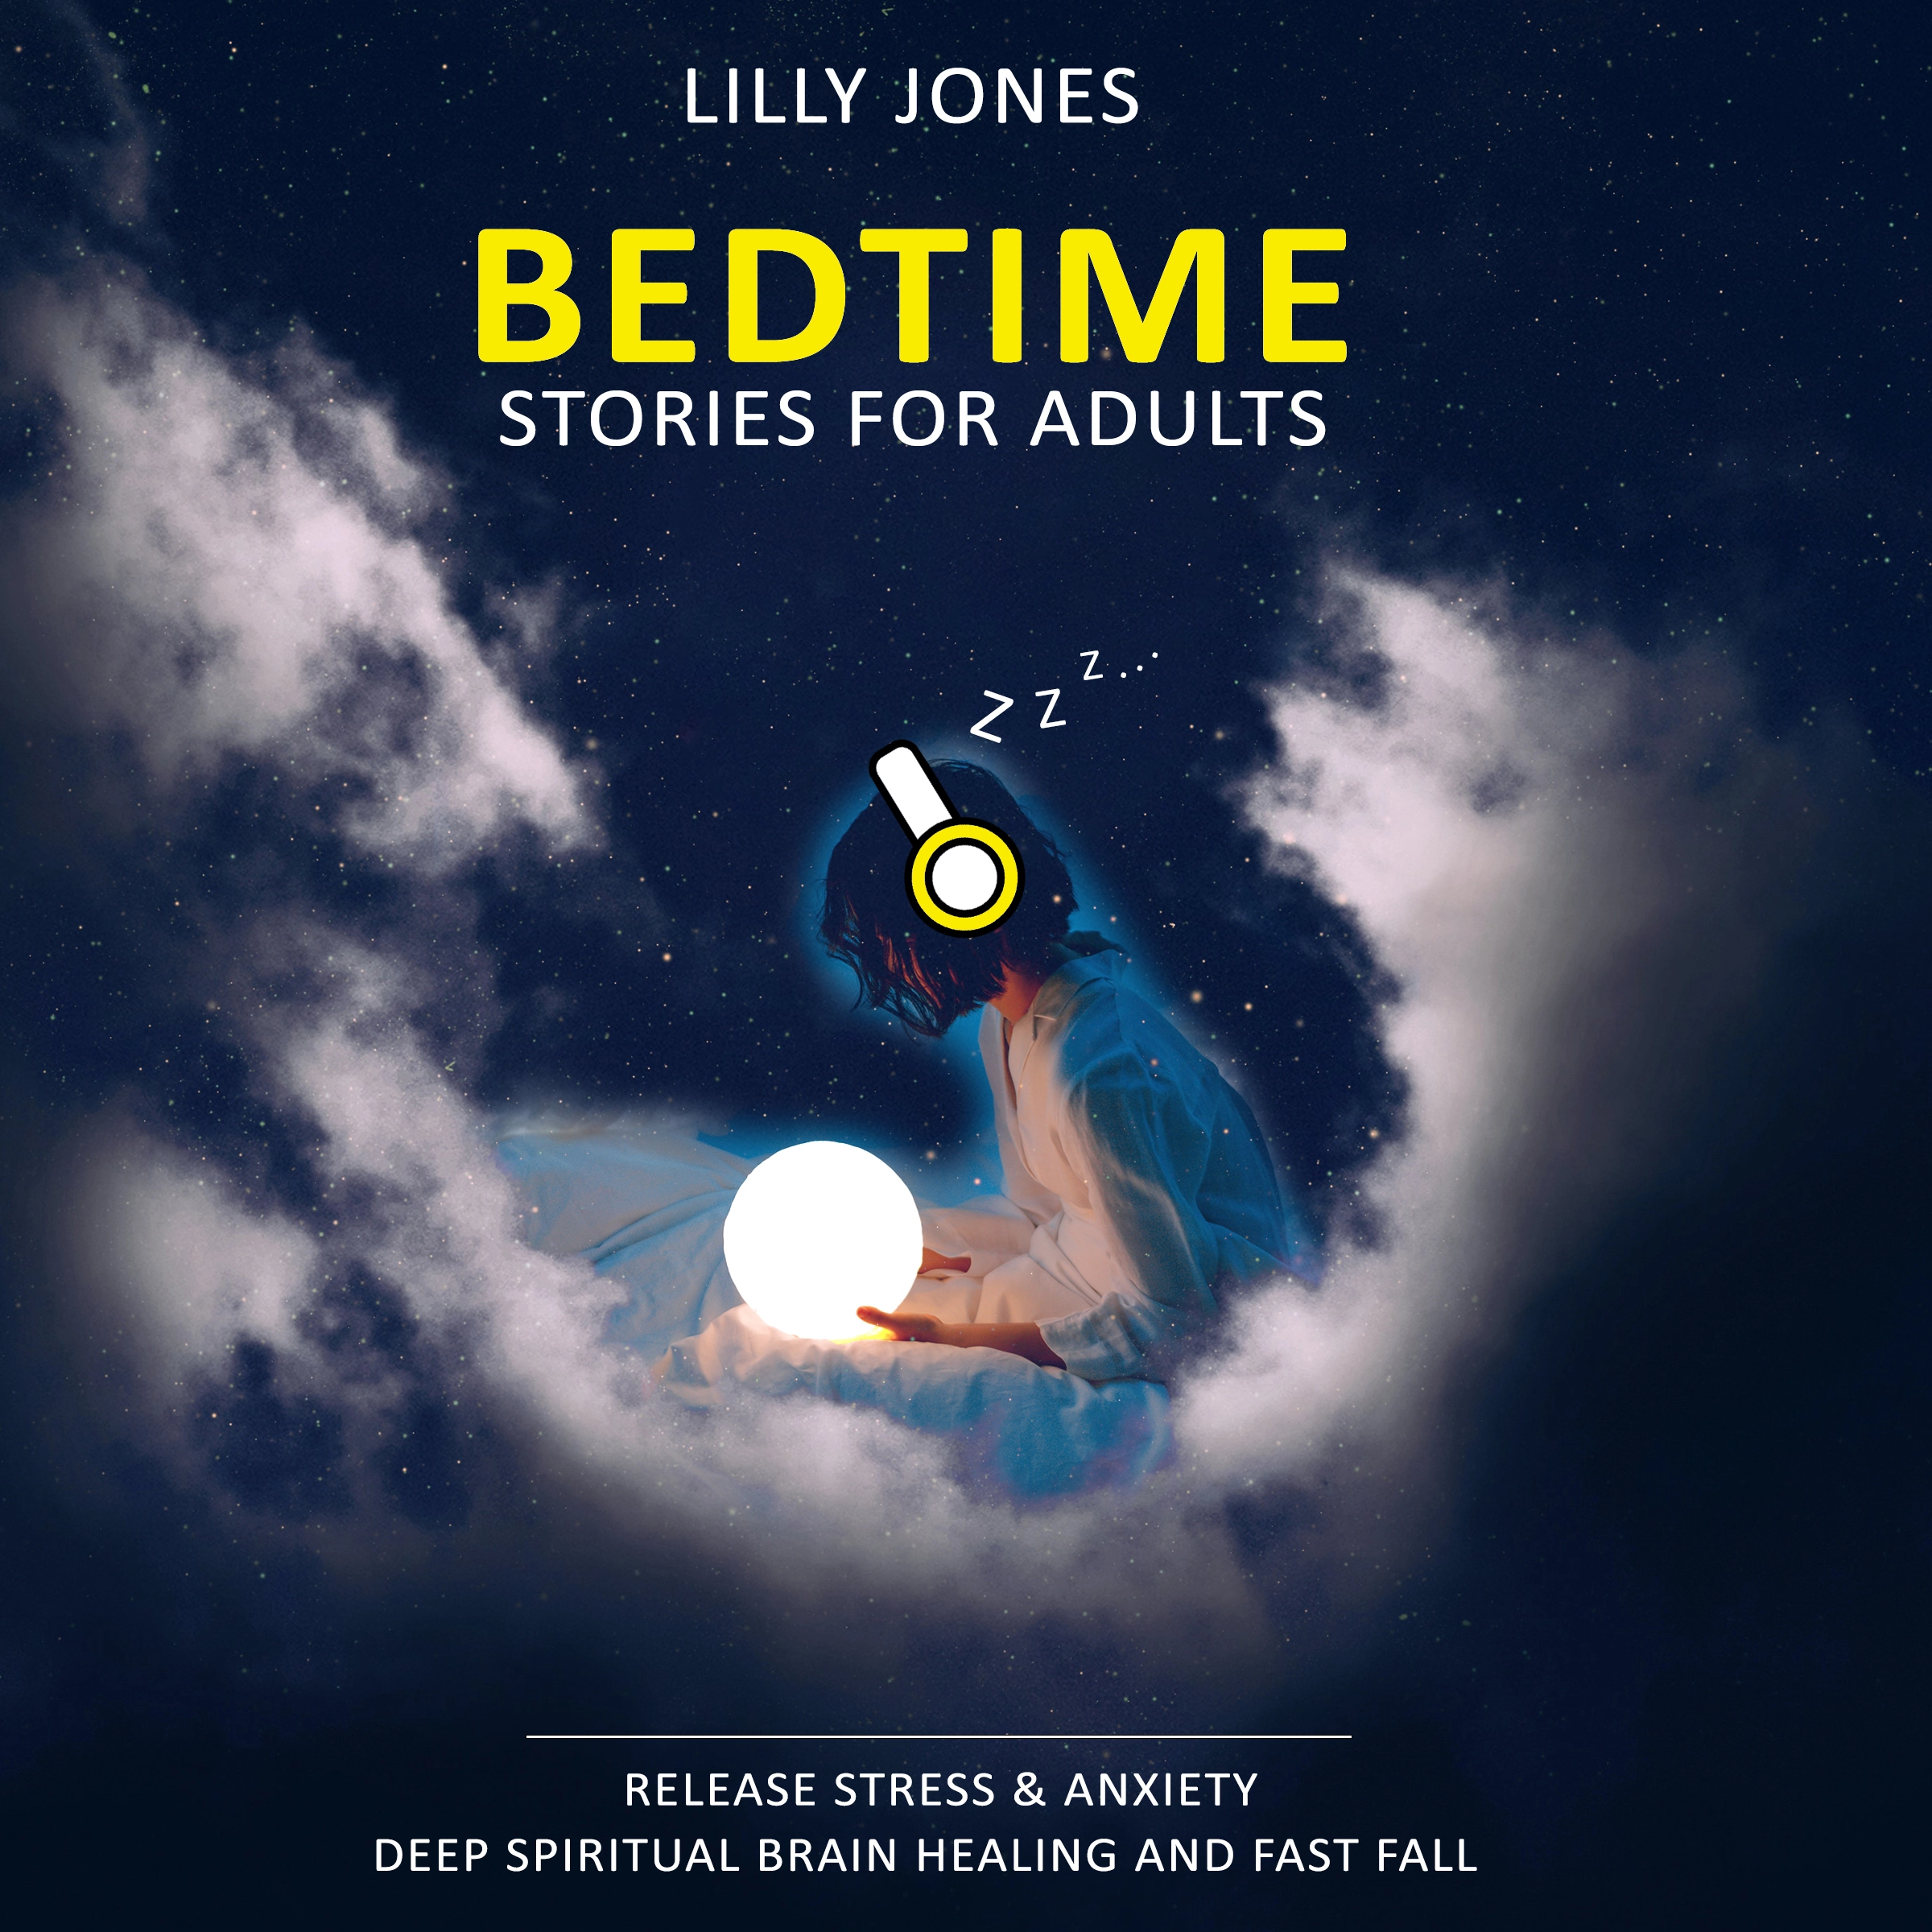 Bedtime Stories for Adults Audiobook by Lilly Jones